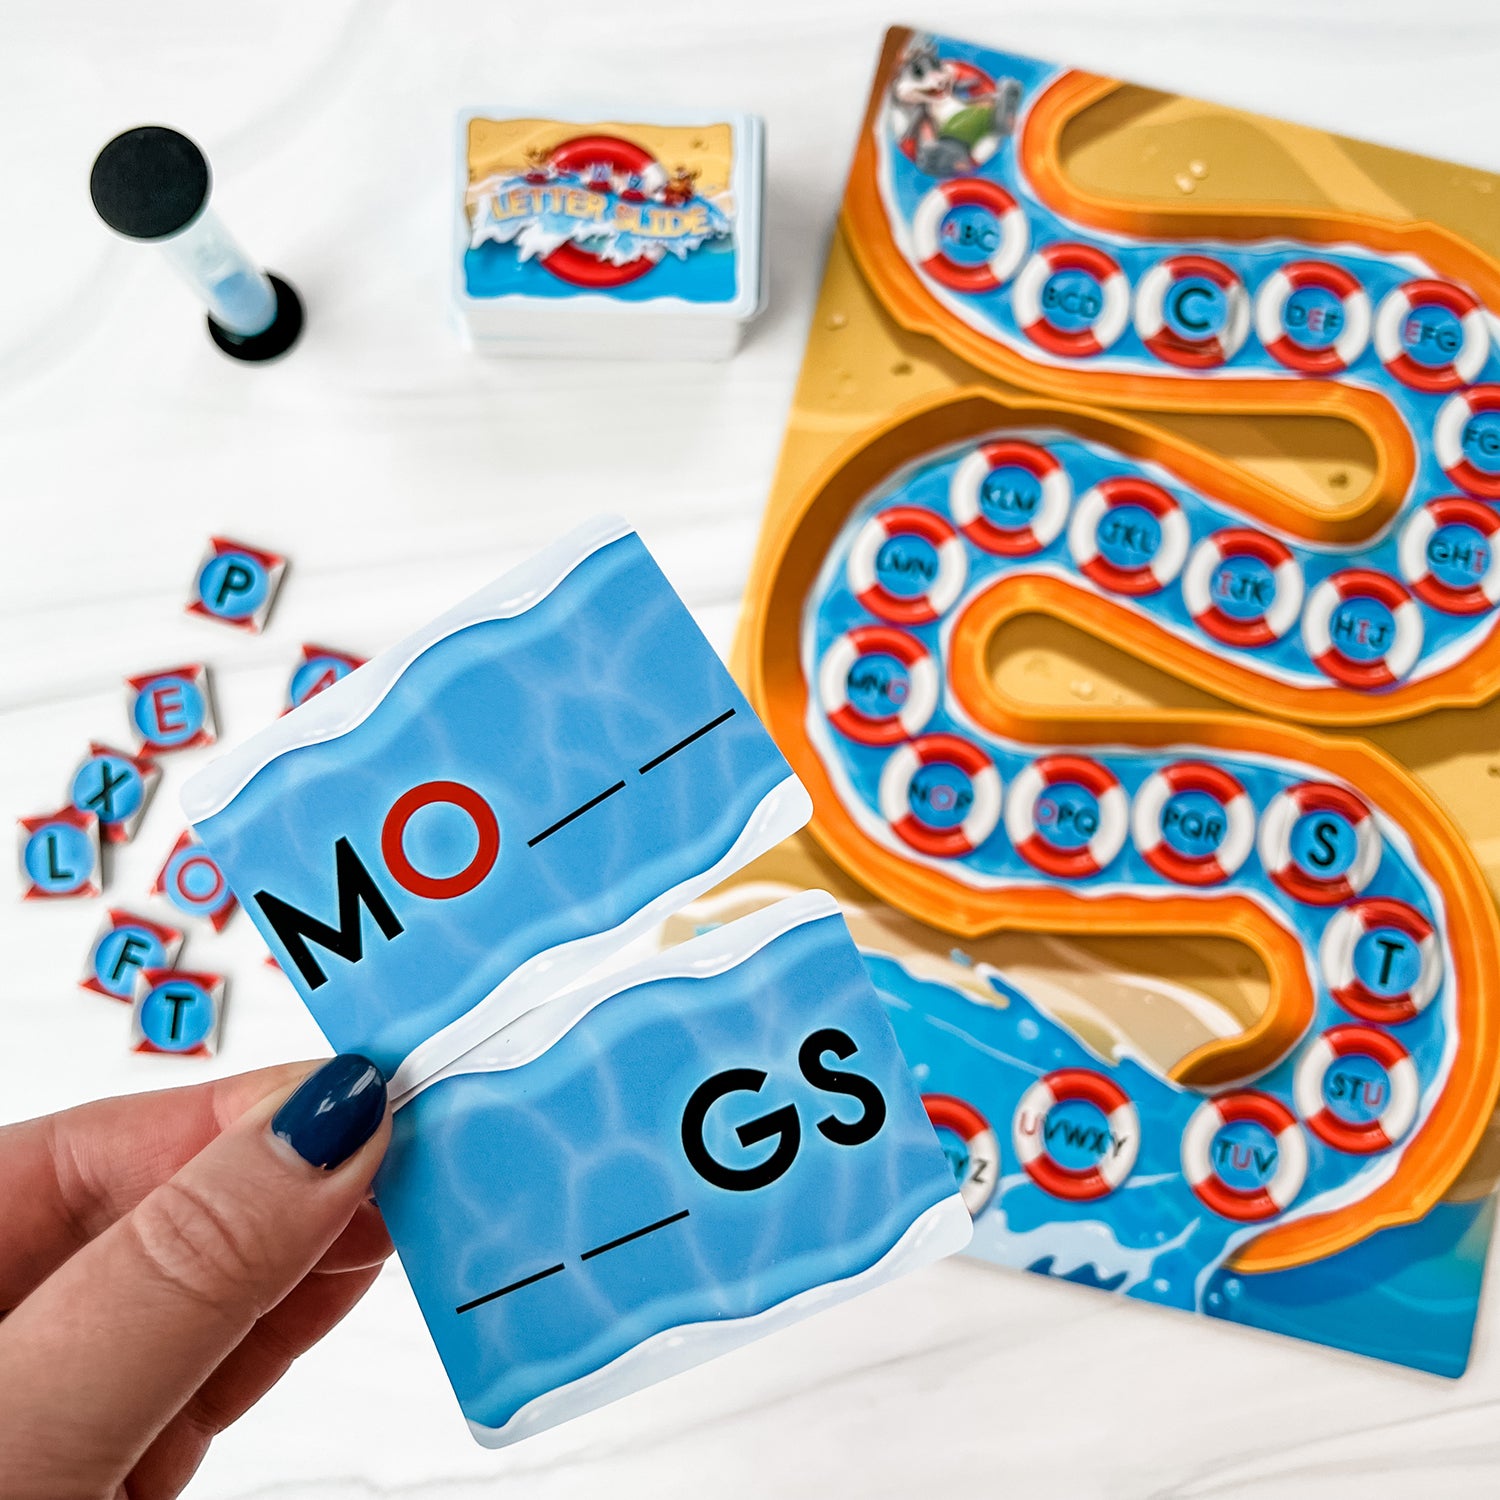 Letter Slide by SimplyFun is a fun spelling game that teaches vocabulary, consonants and vowels.